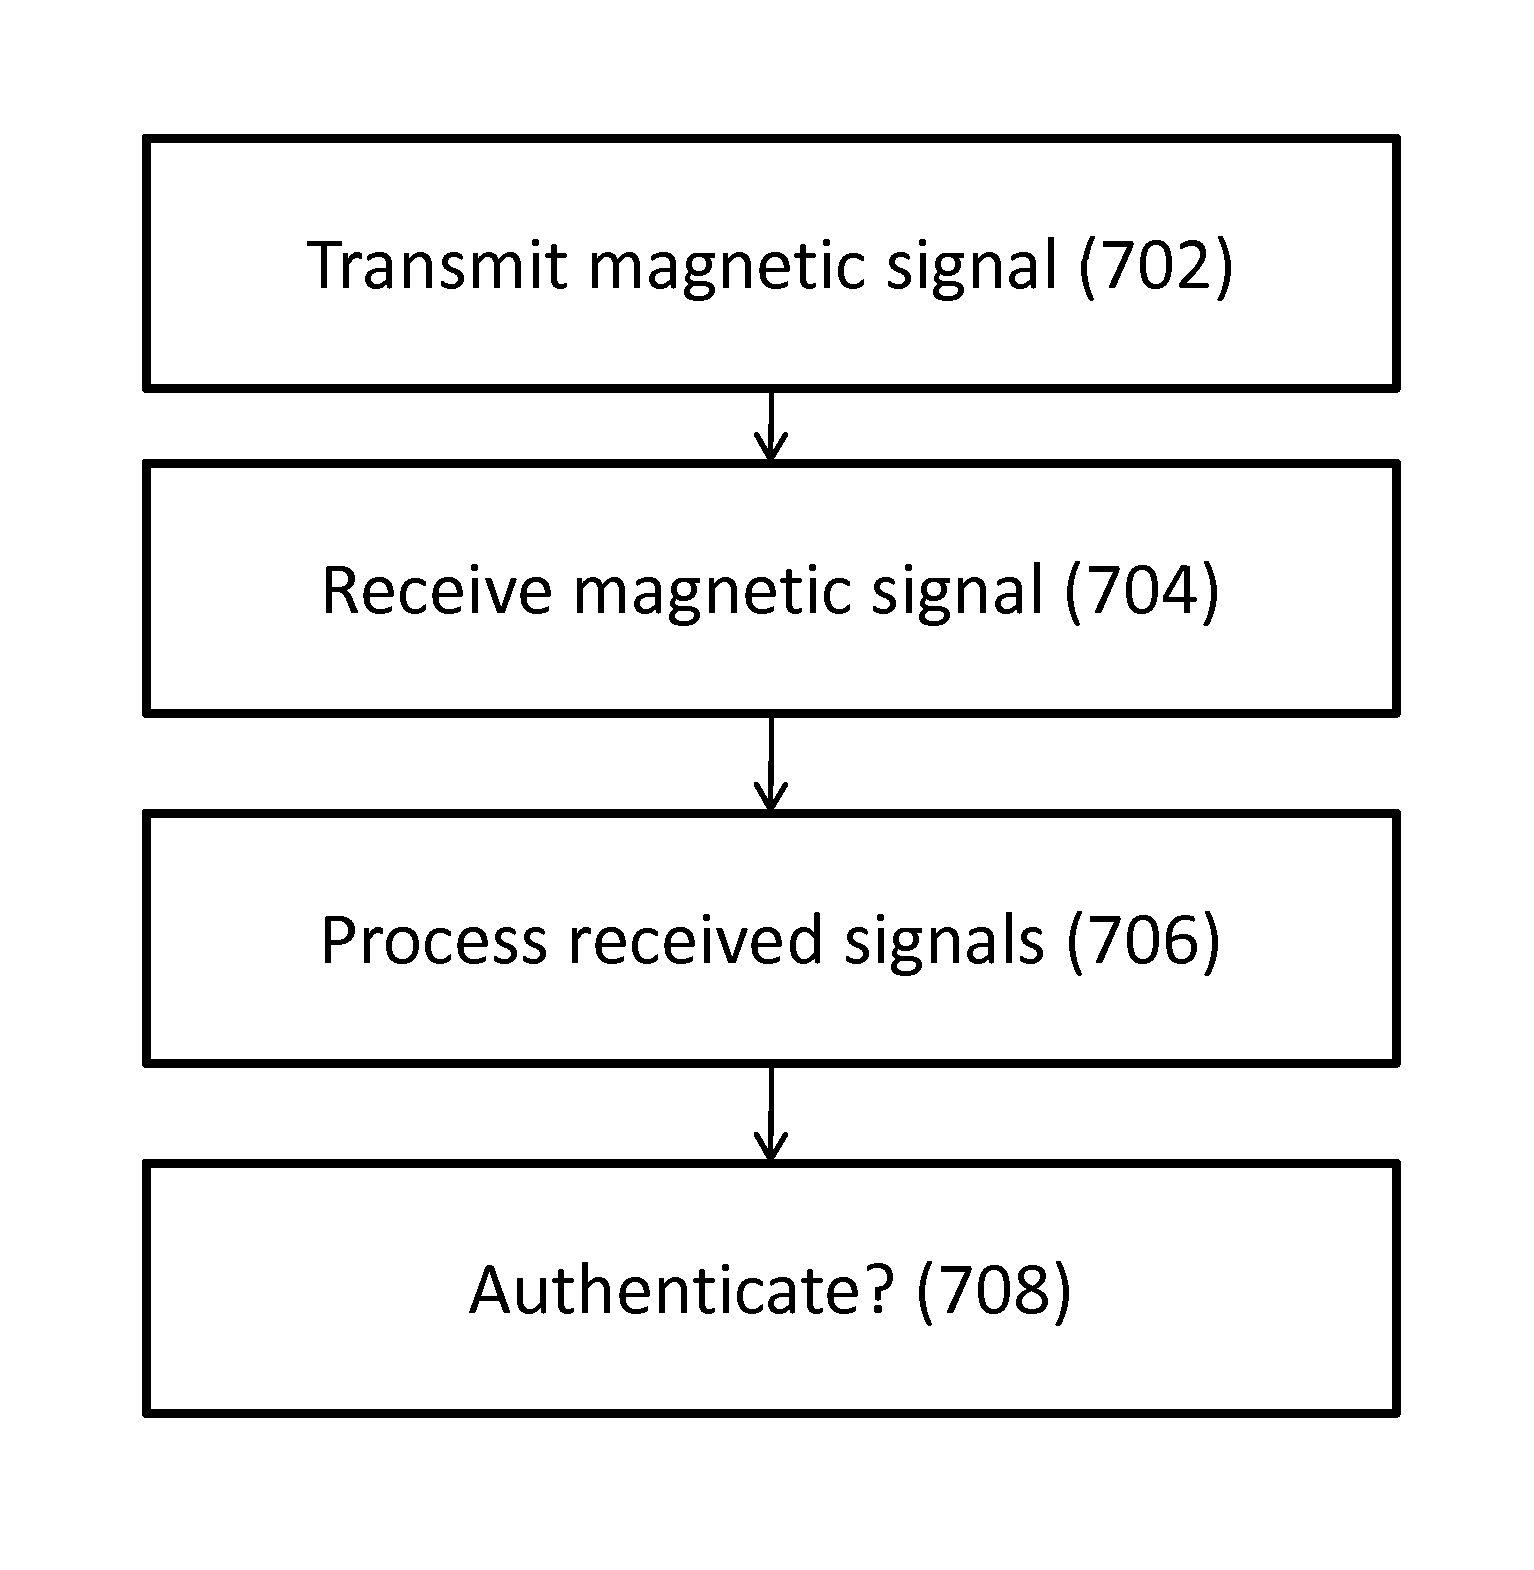 Method and System for Communication Between Devices